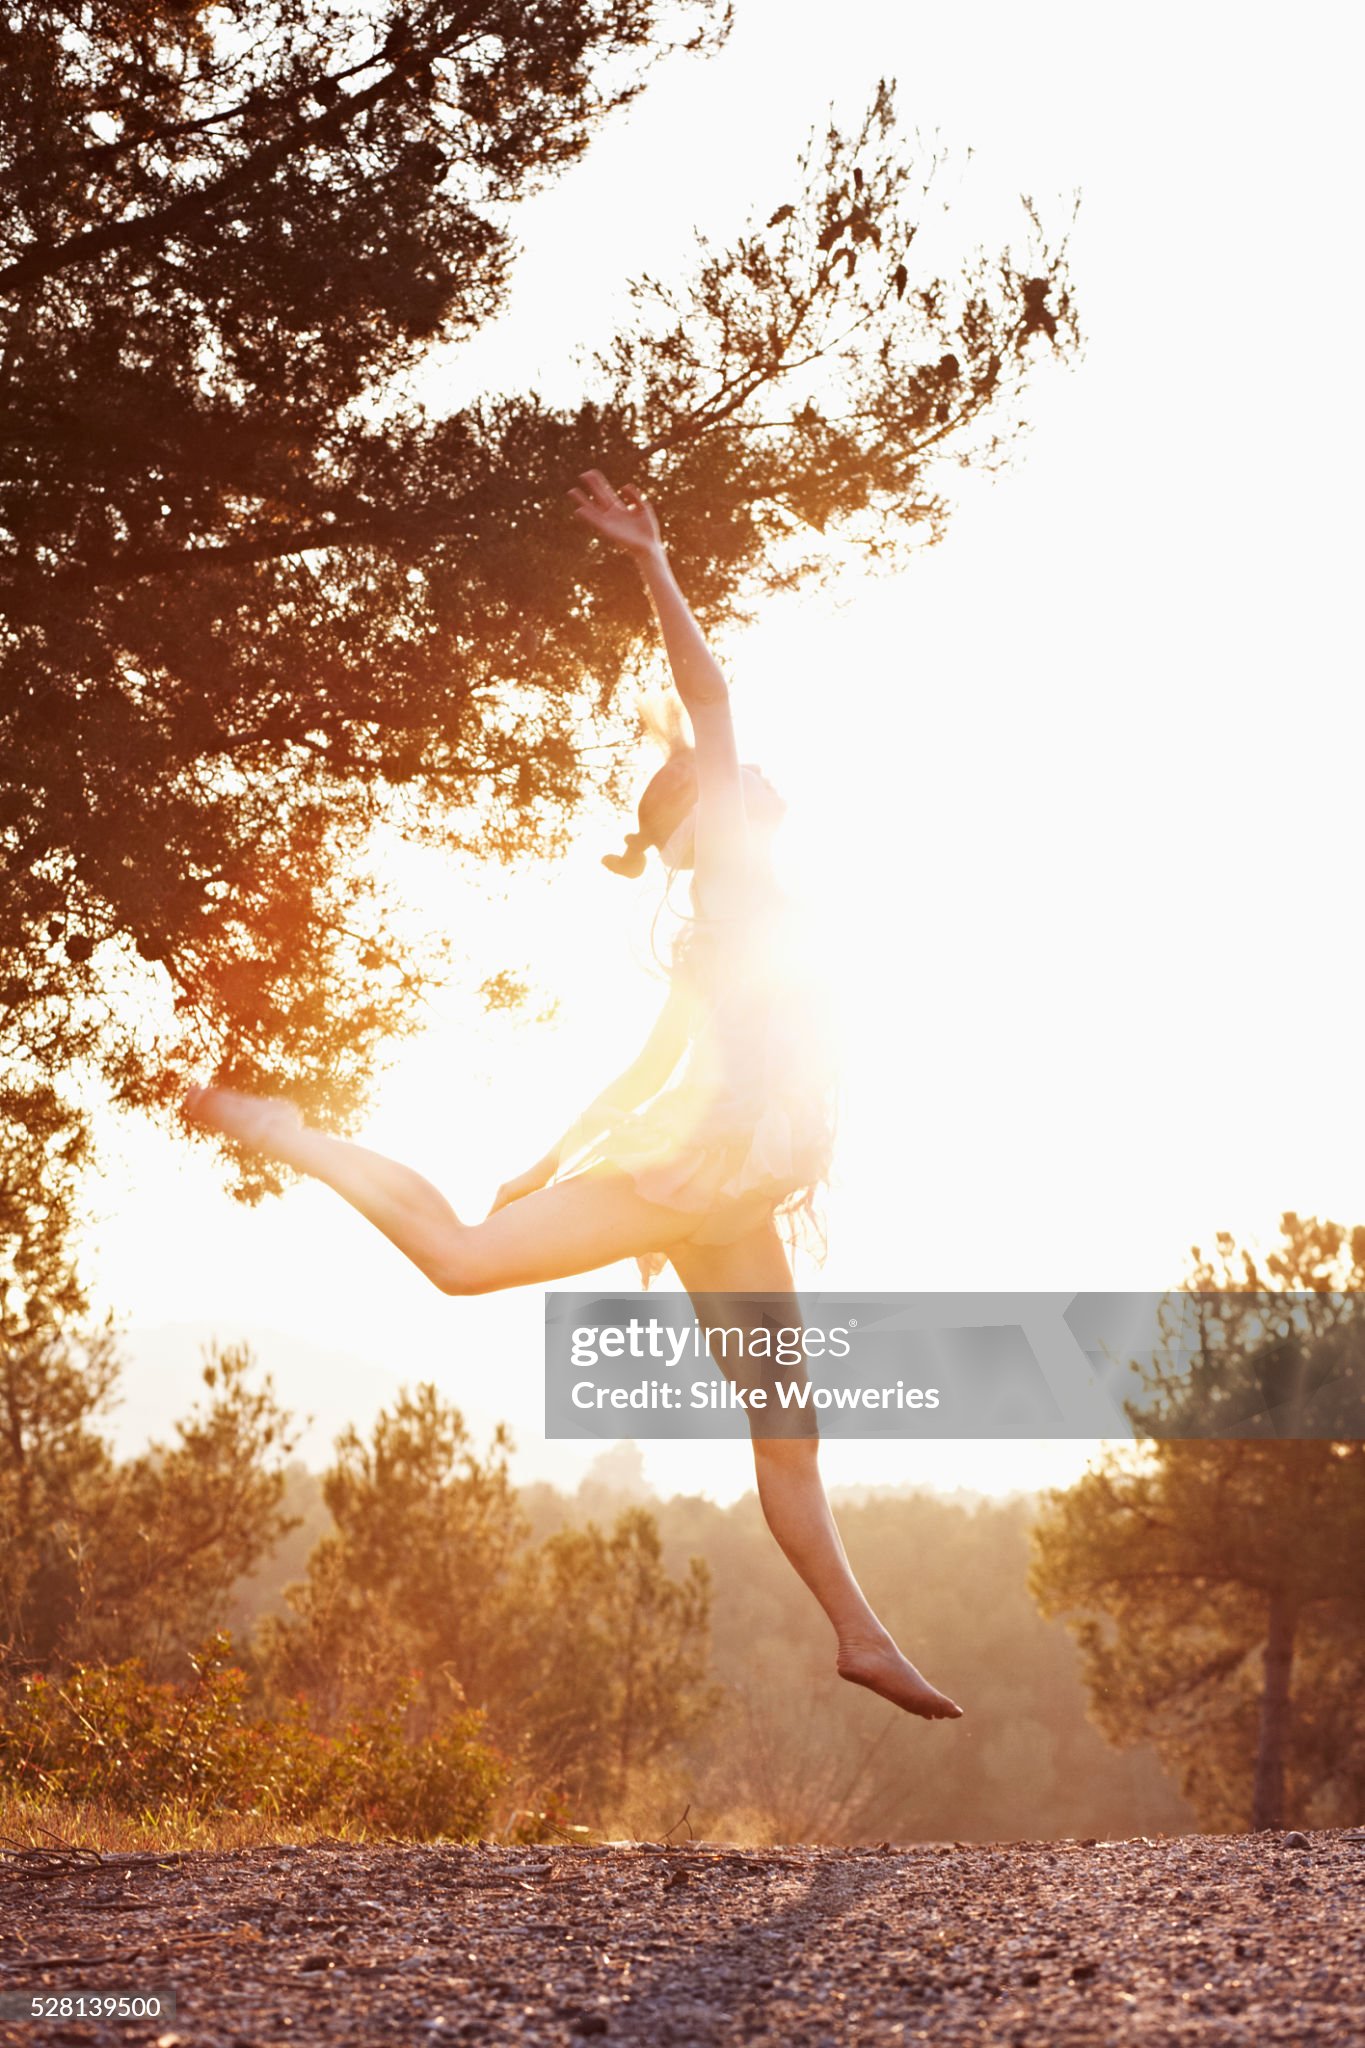 https://media.gettyimages.com/id/528139500/photo/young-woman-dancing-at-sunset.jpg?s=2048x2048&amp;w=gi&amp;k=20&amp;c=X4Rr589eHJHqR-jUDg-6XBRM4nQLkl1nOxkiXCwIXaQ=